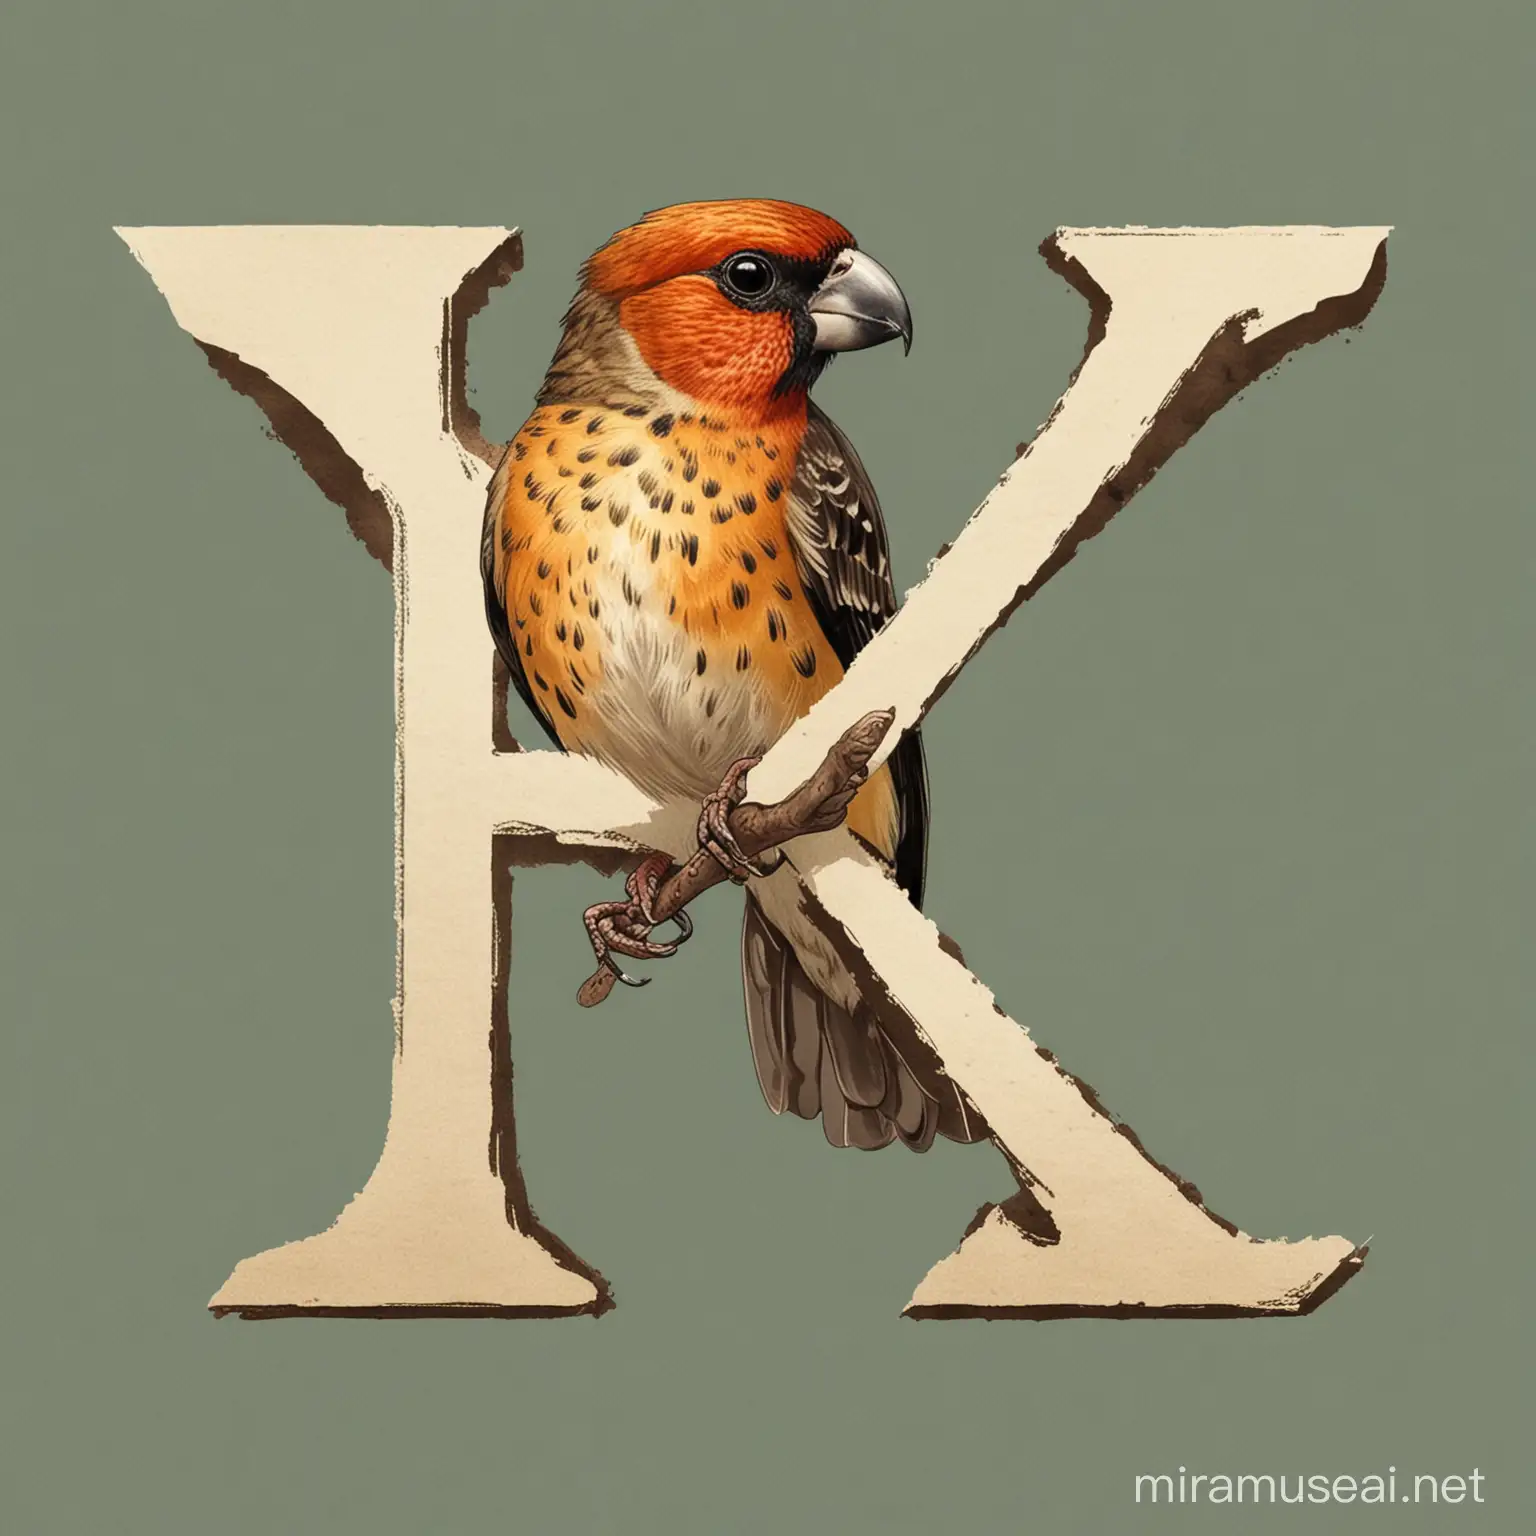 A logo of the bird galapagos finch with the letter "K" on its wings